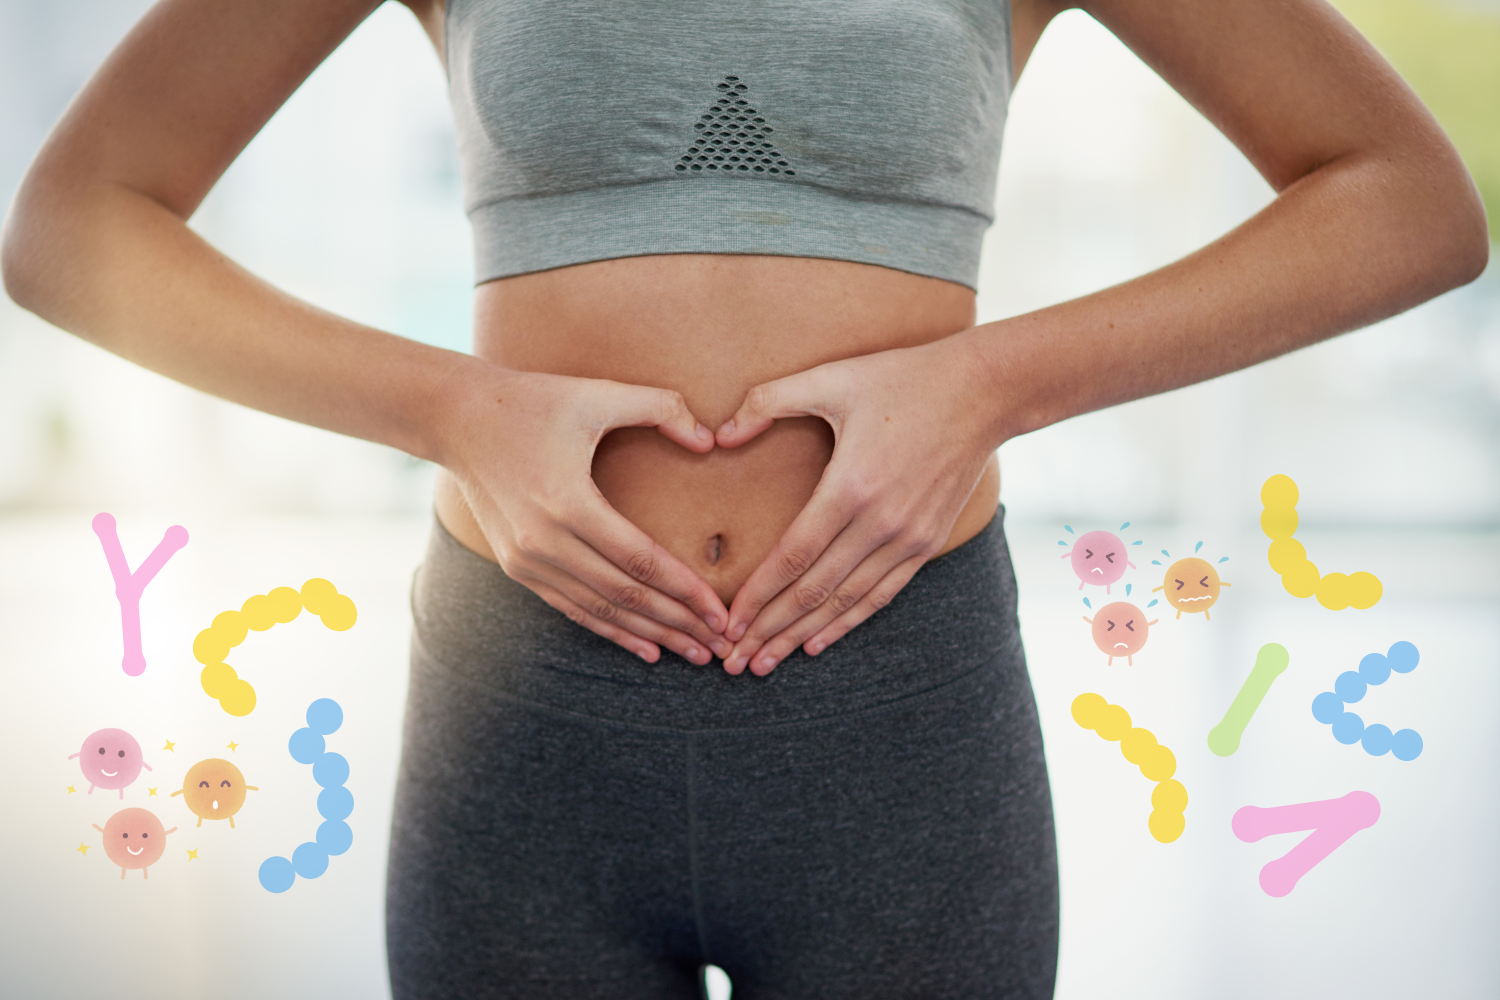 Gut Health and Microbiomes - the missing link in your weight loss journey?